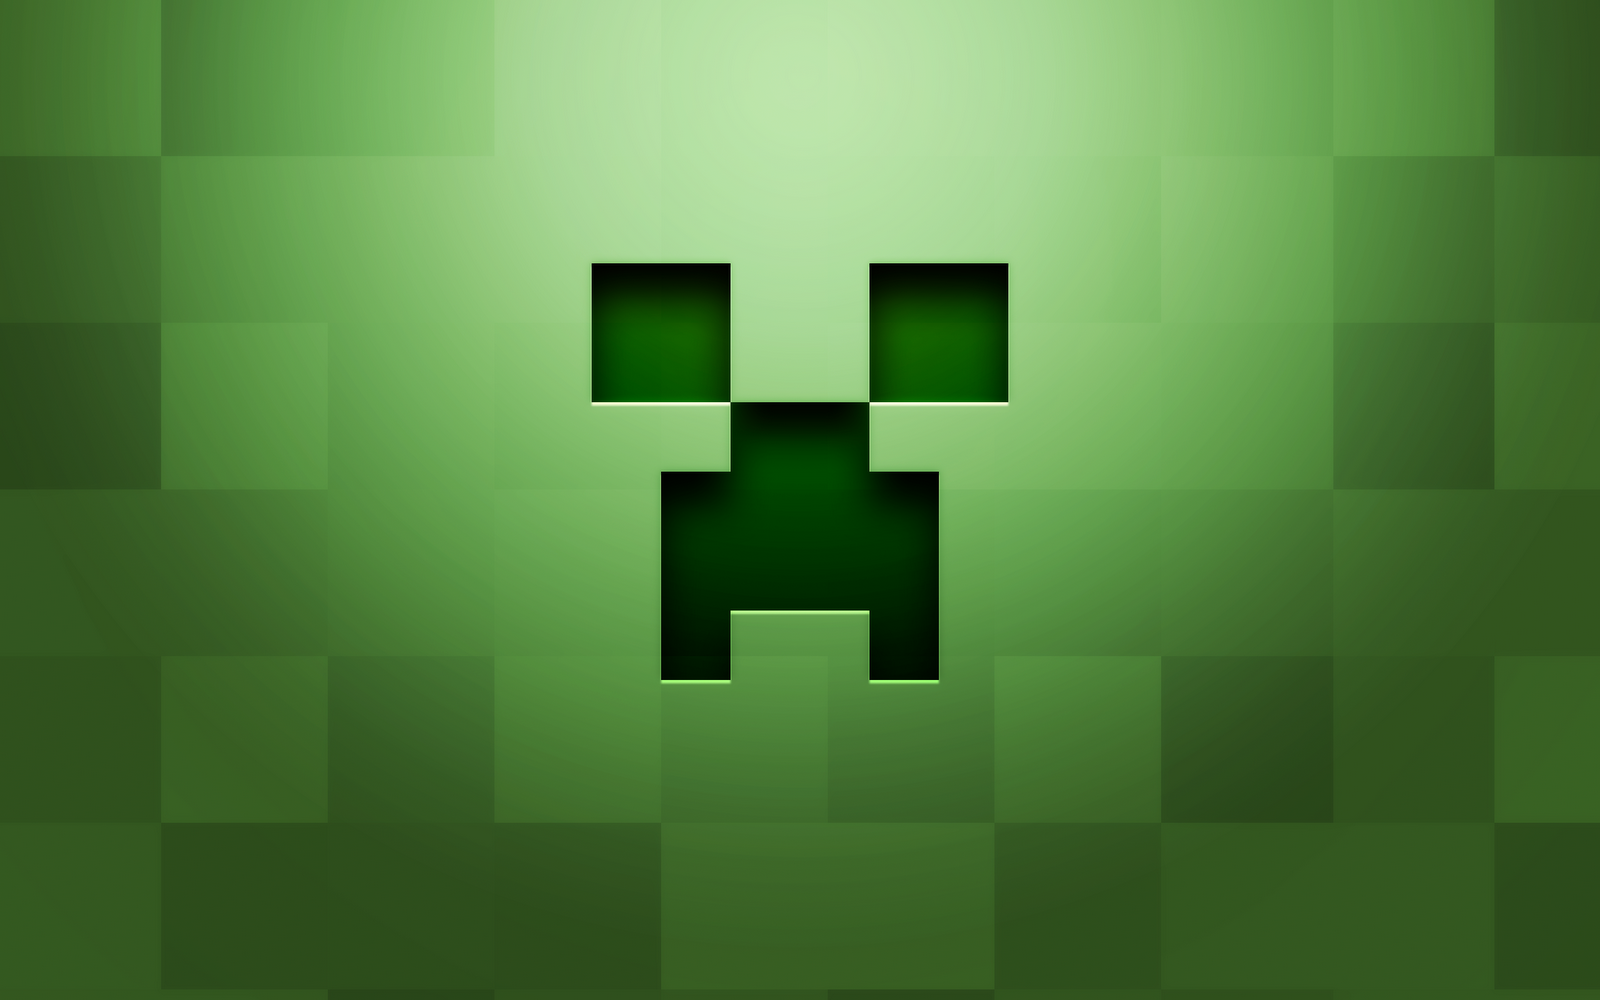 General 1600x1000 Minecraft creeper video games green PC gaming video game art green background square grid